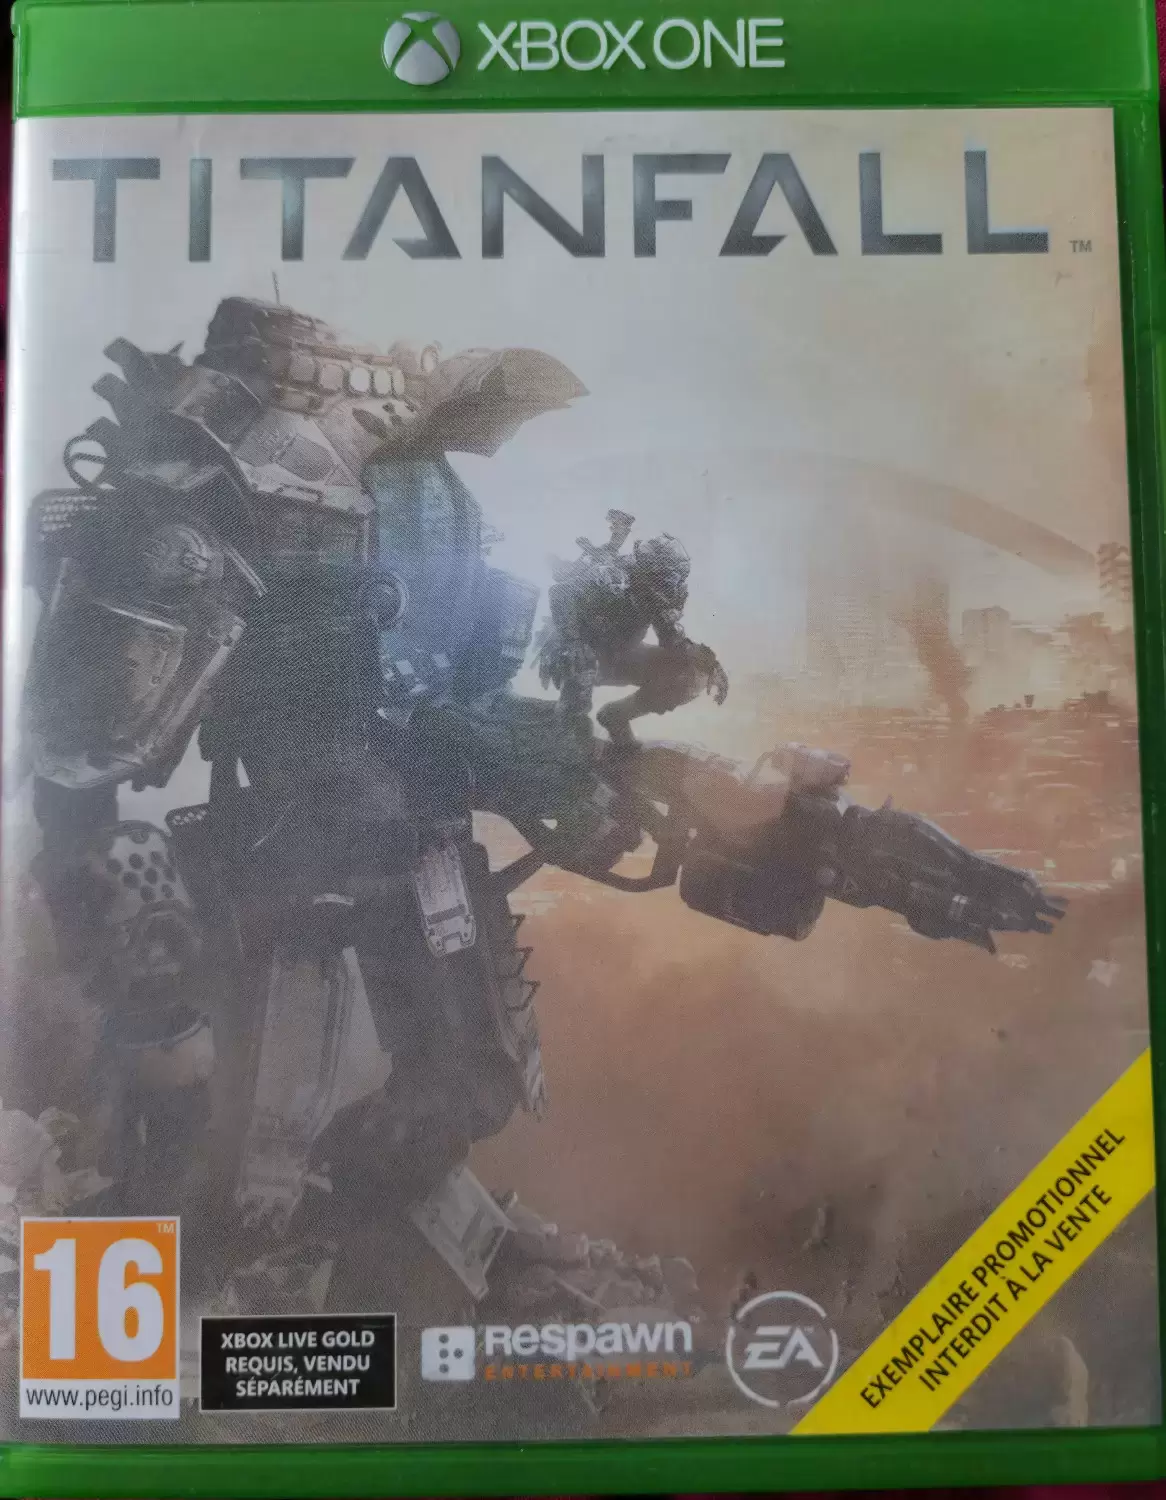 Jeux XBOX One - Titanfall- Exemplaire promotionnel